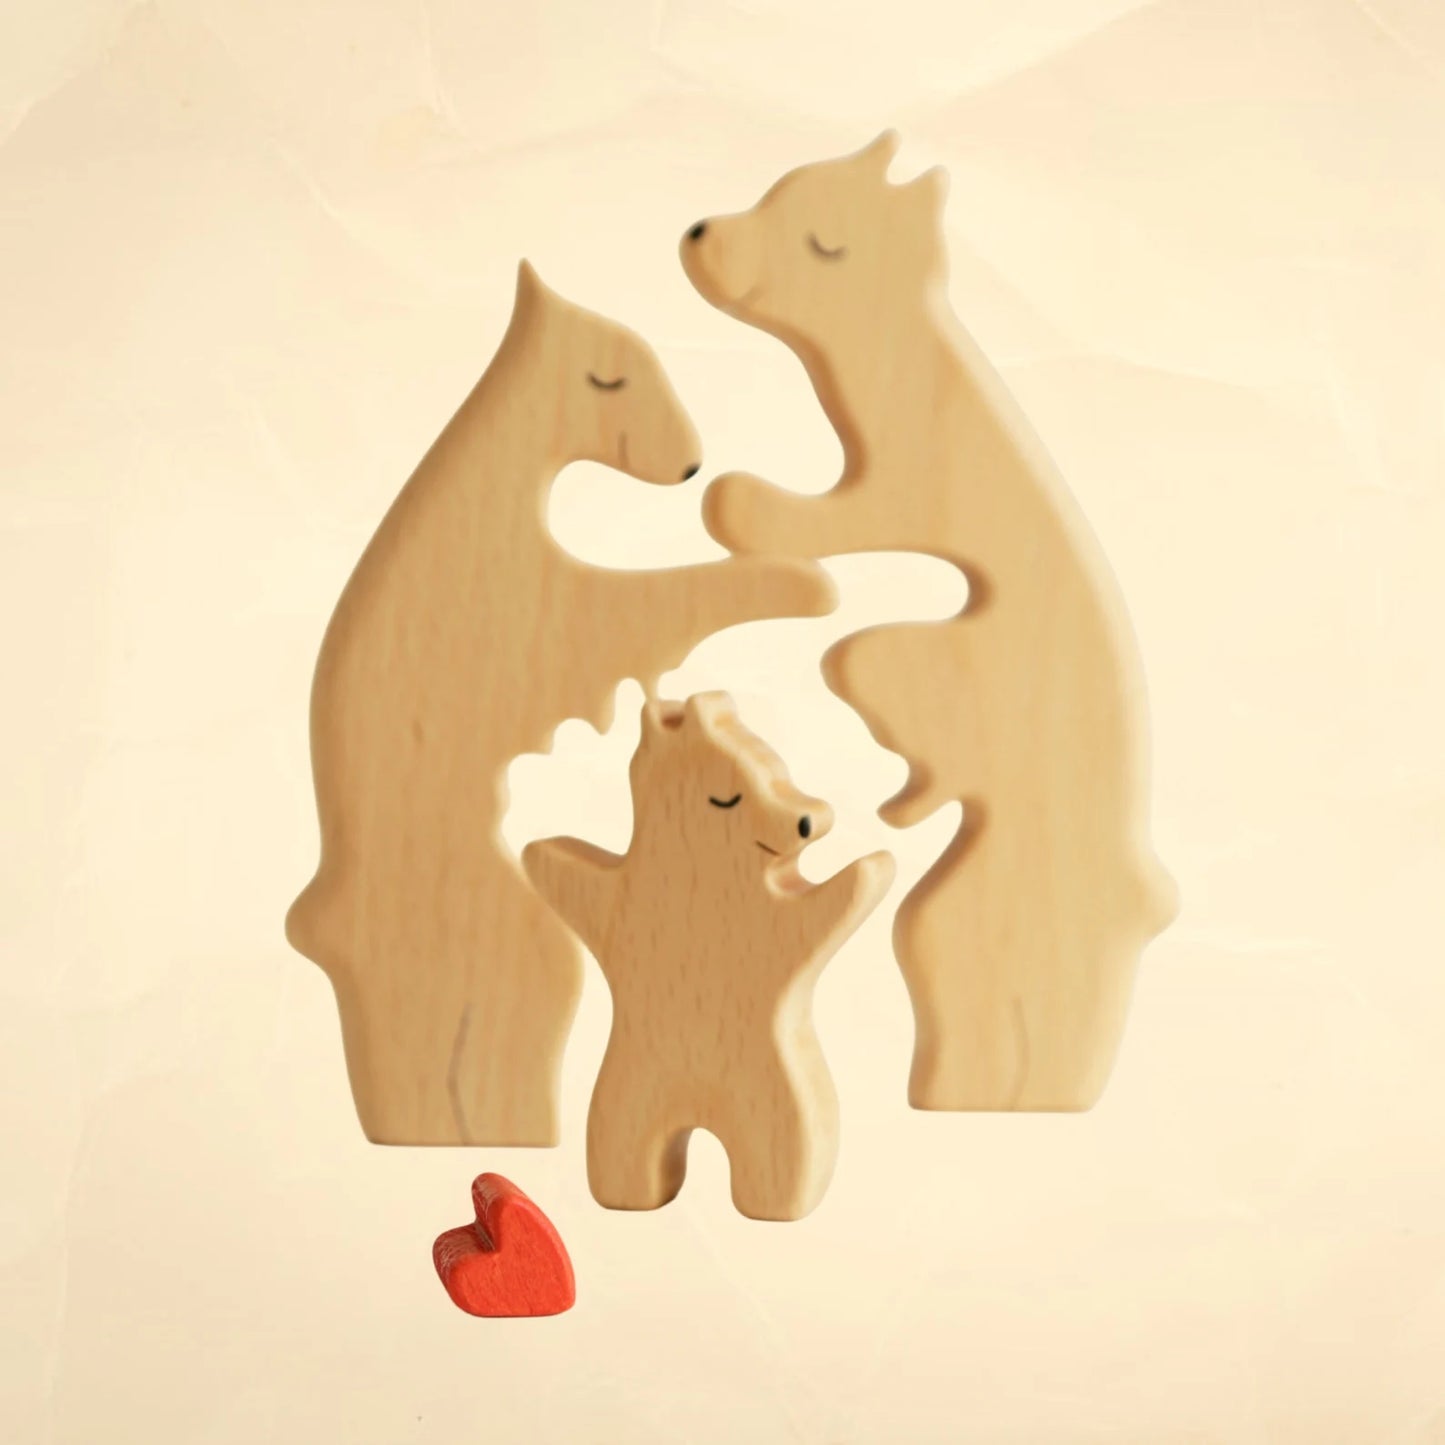 Personalized Wooden Bear Puzzle Gift For Home Decoration - Bear Family Up to 7 Members